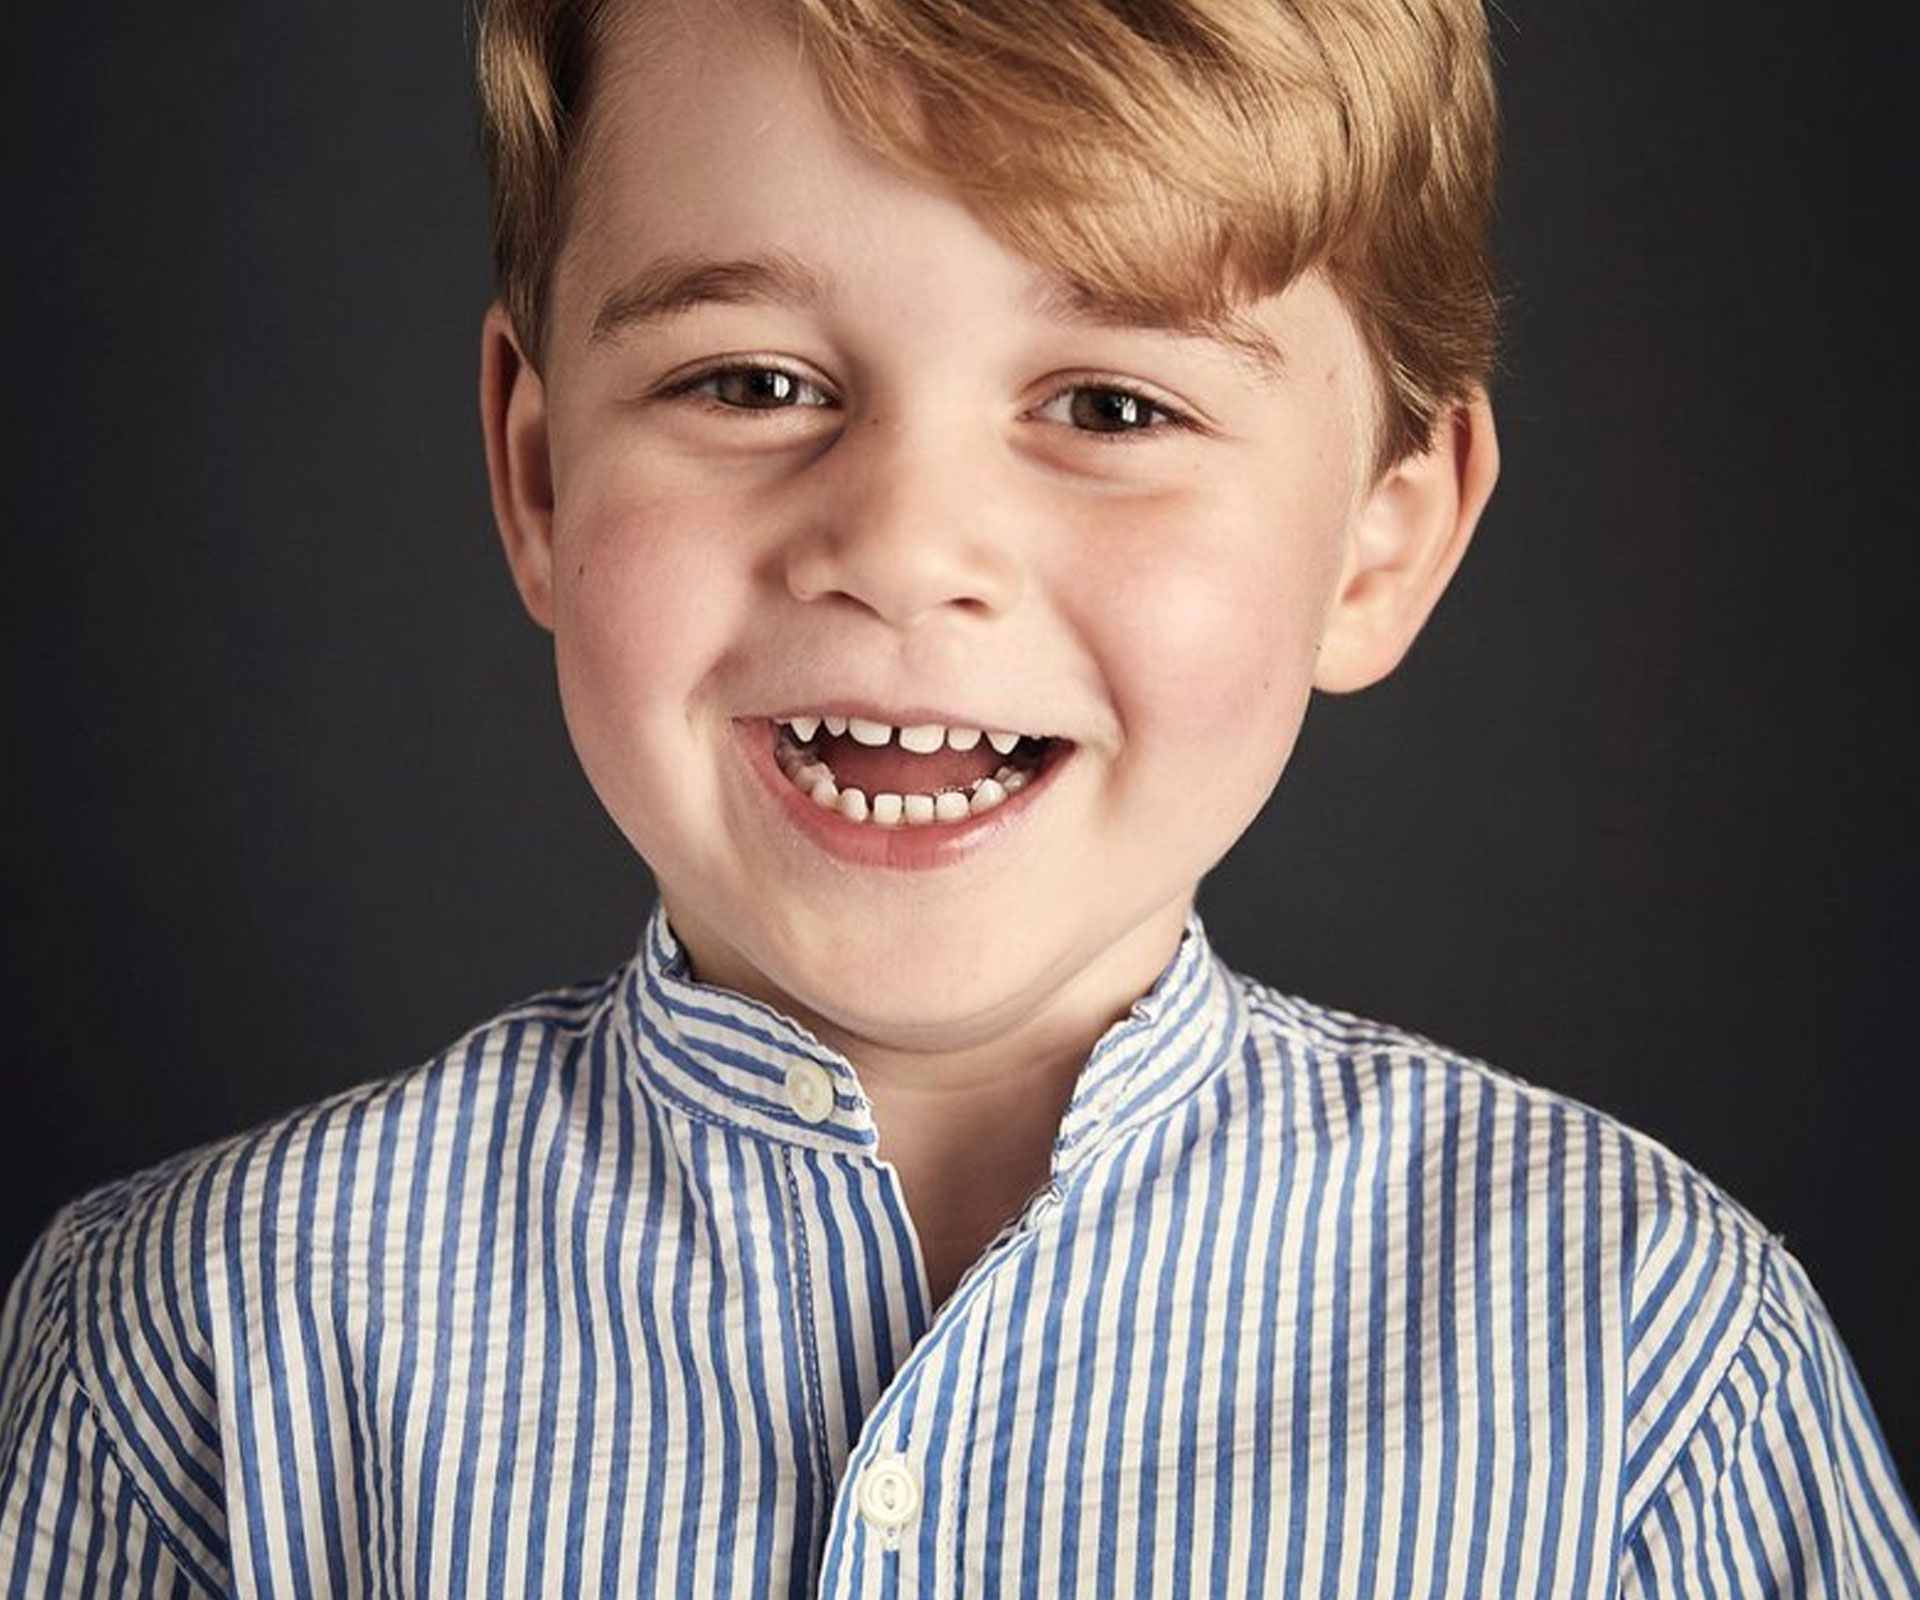 Happy Birthday Prince George! The family celebrate with a brand new portrait!